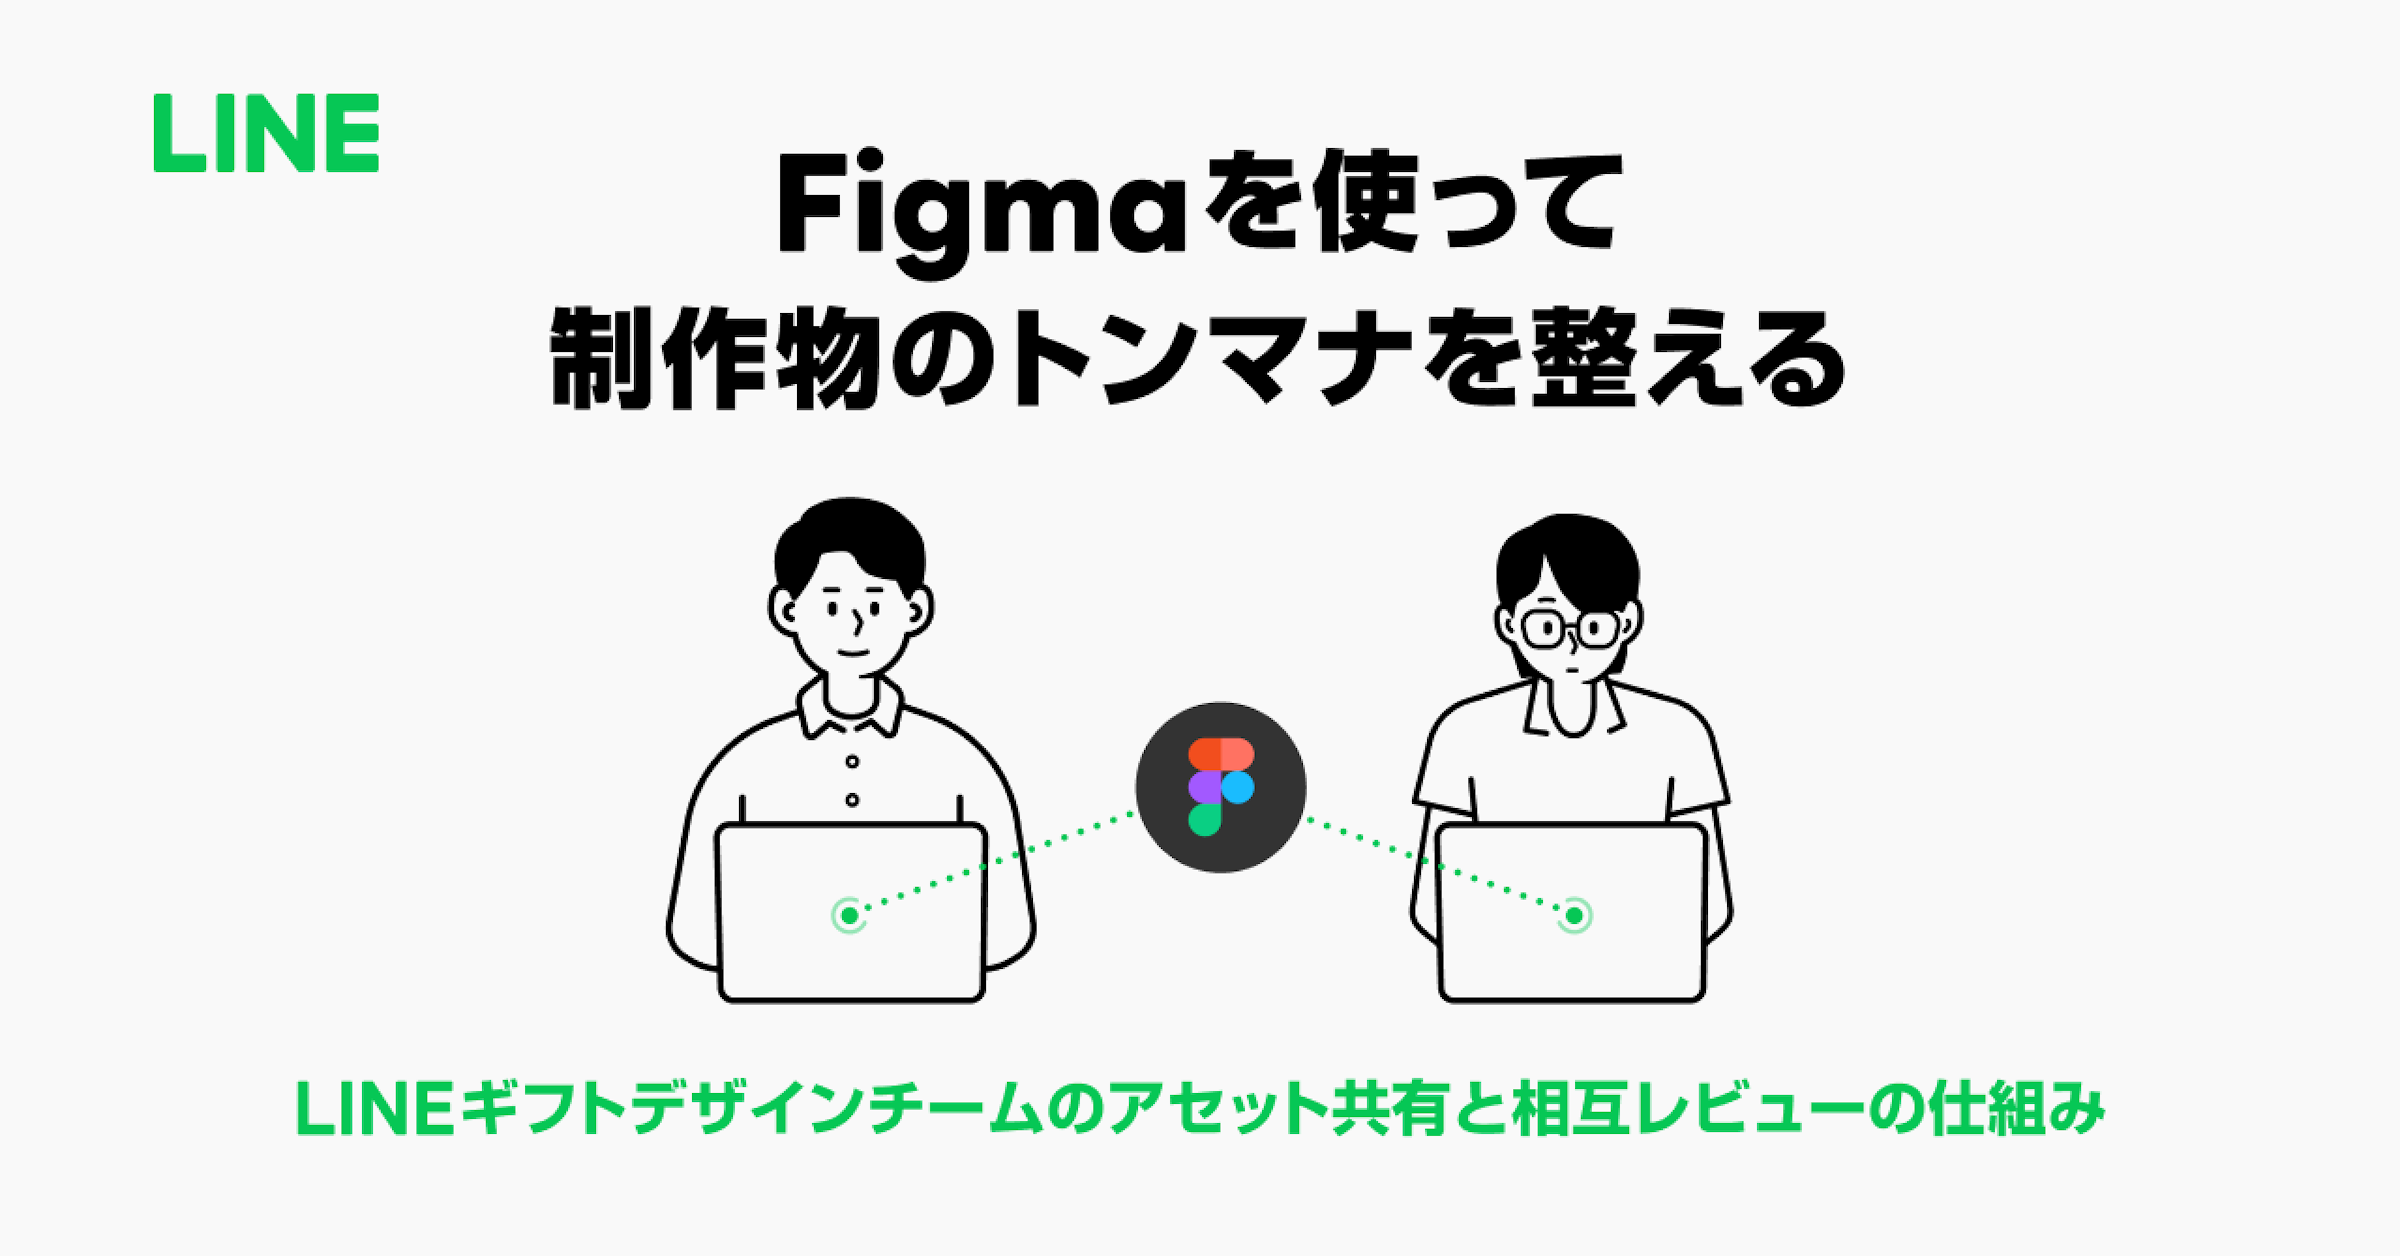 Figmaを使って制作物のトンマナを整える。LINEギフトデザインチームのアセット共有と相互レビューの仕組み